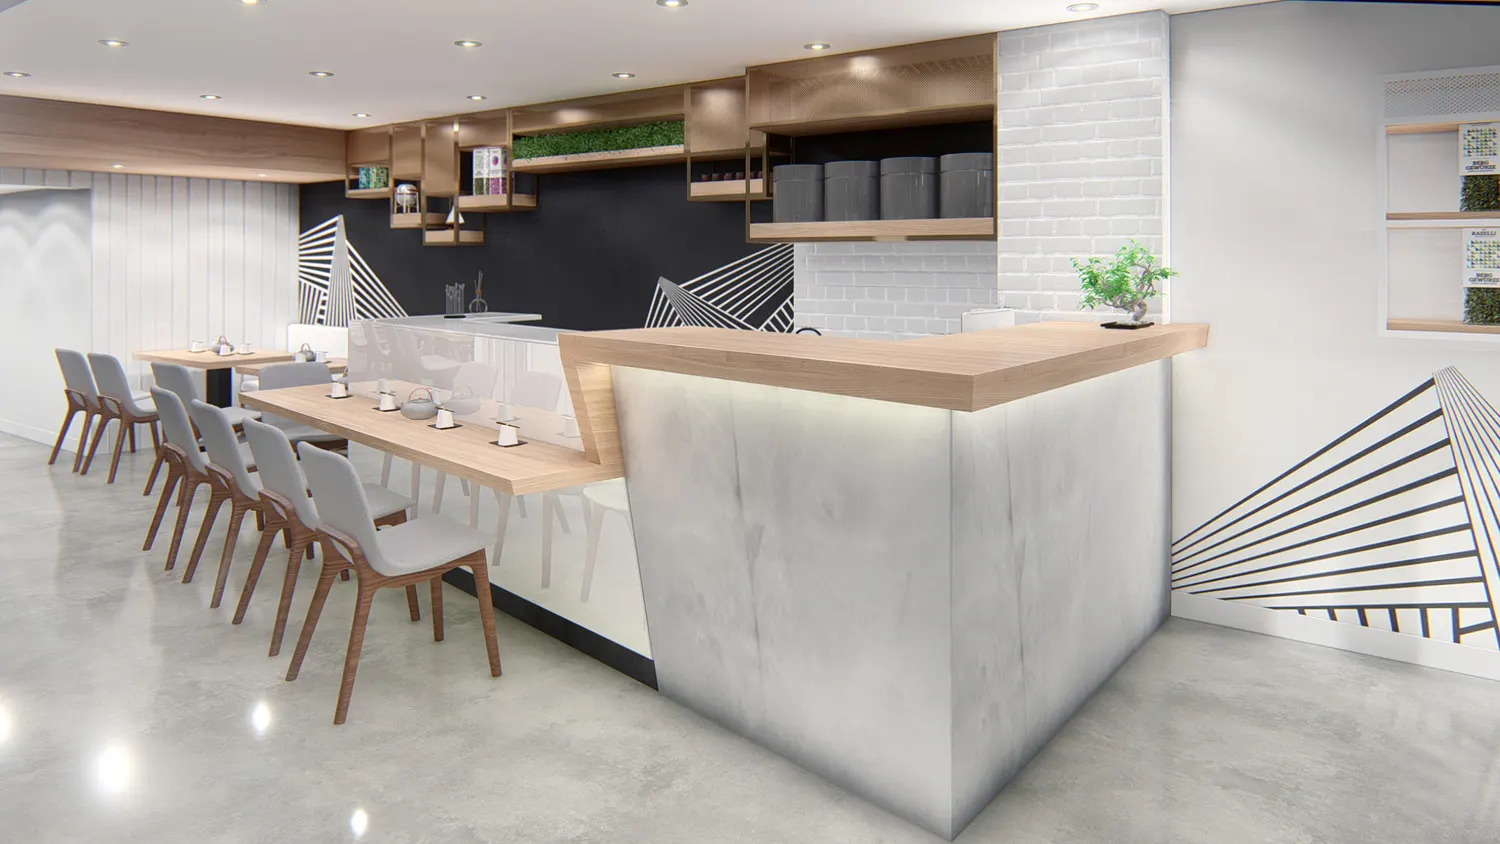 Interior design project for Awas Noodles 阿華師. Designed 3D rendering